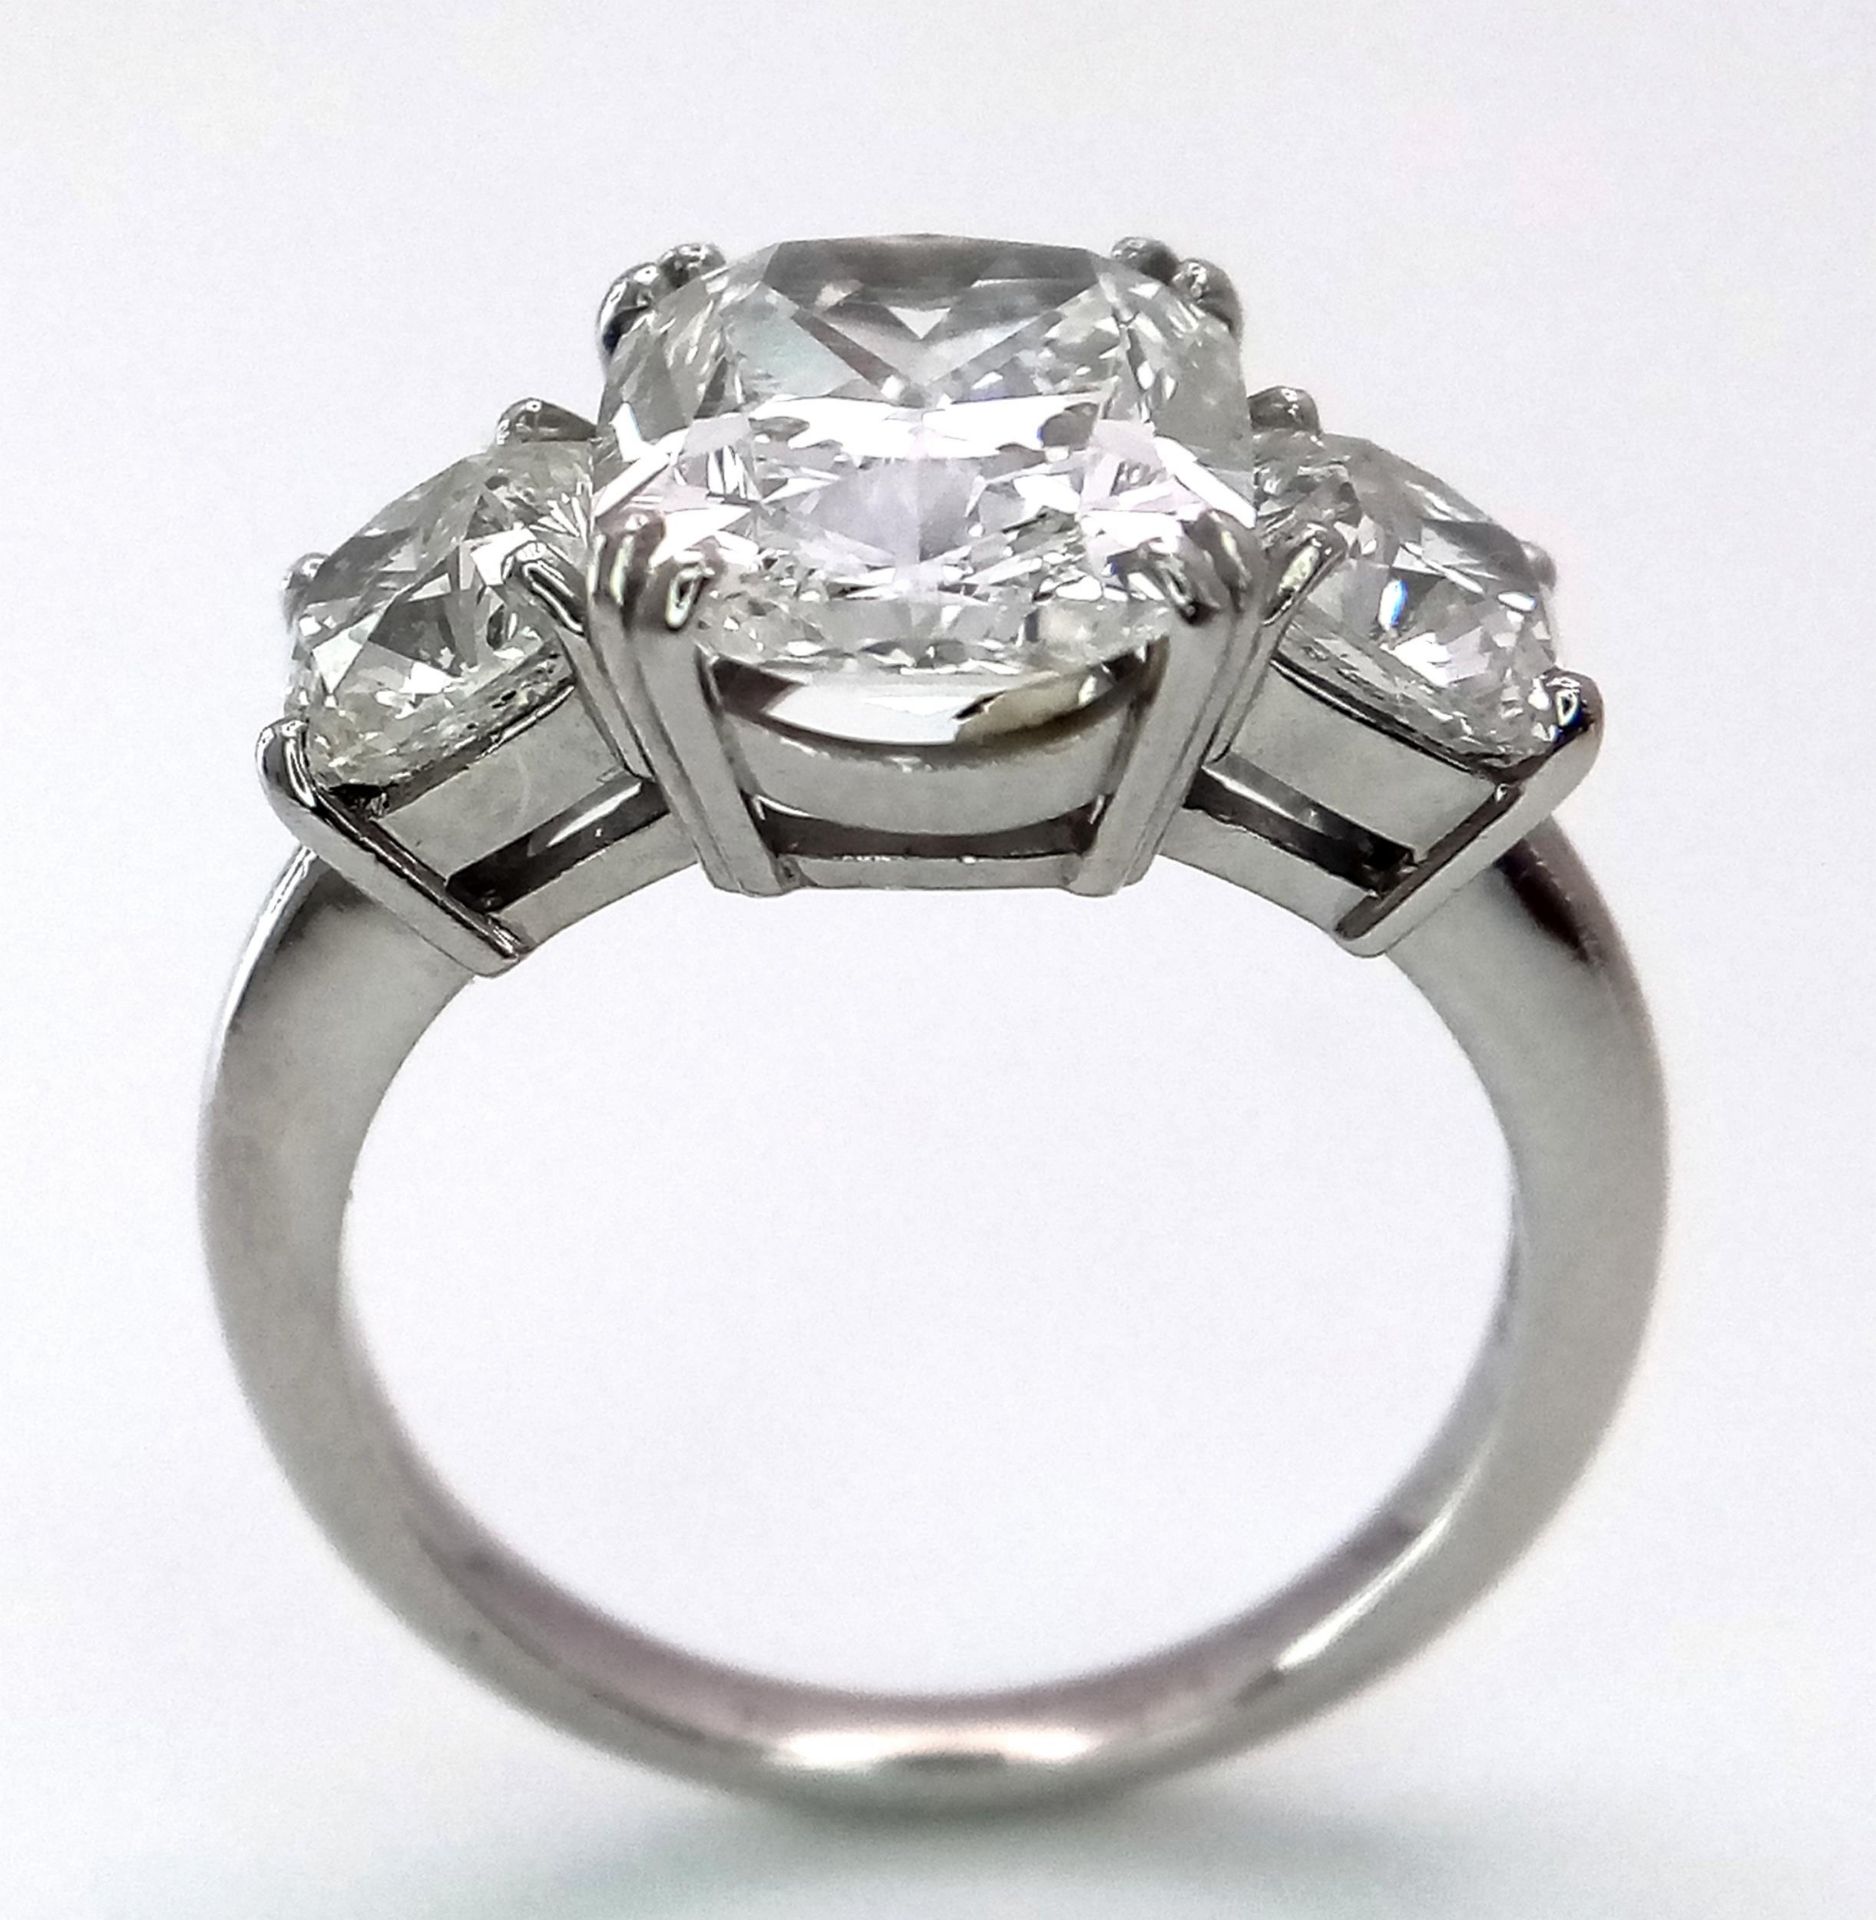 A Breathtaking 4.01ct GIA Certified Diamond Ring. A brilliant cushion cut 4.01ct central diamond - Image 3 of 22